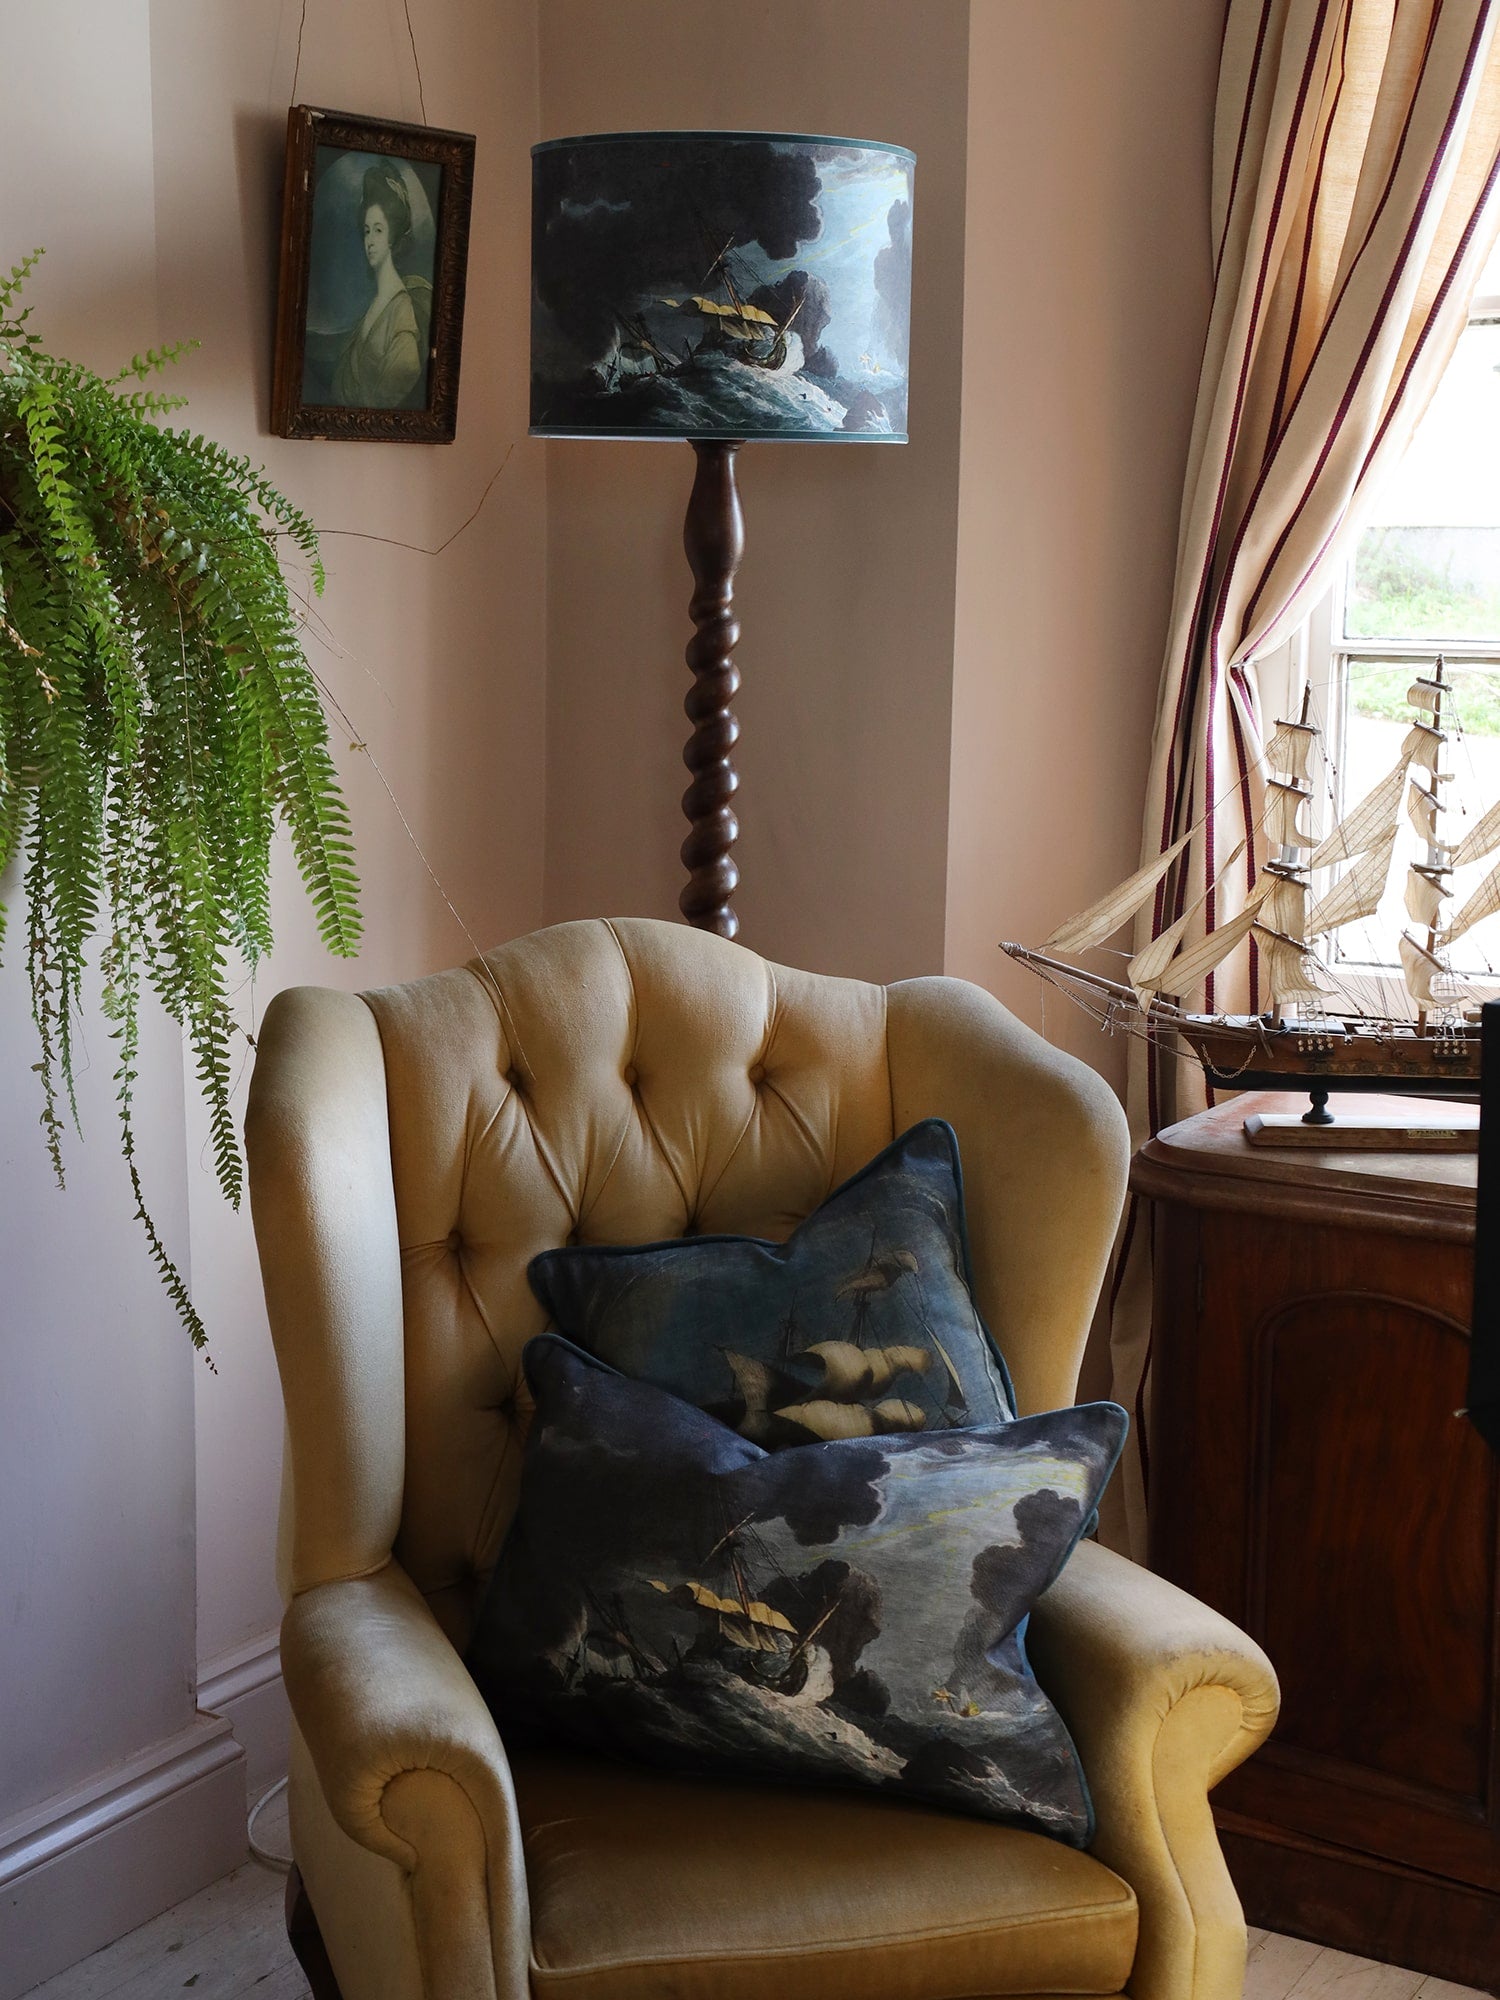 A shipwreck scene lampshade in dark blues and brown on a dark wooden twisted standard lamp base, placed behind a mustard velvet buttoned high back chair with an old portrait of a lady to the side and a model of a galleon on the table, all set against pink plaster walls. 